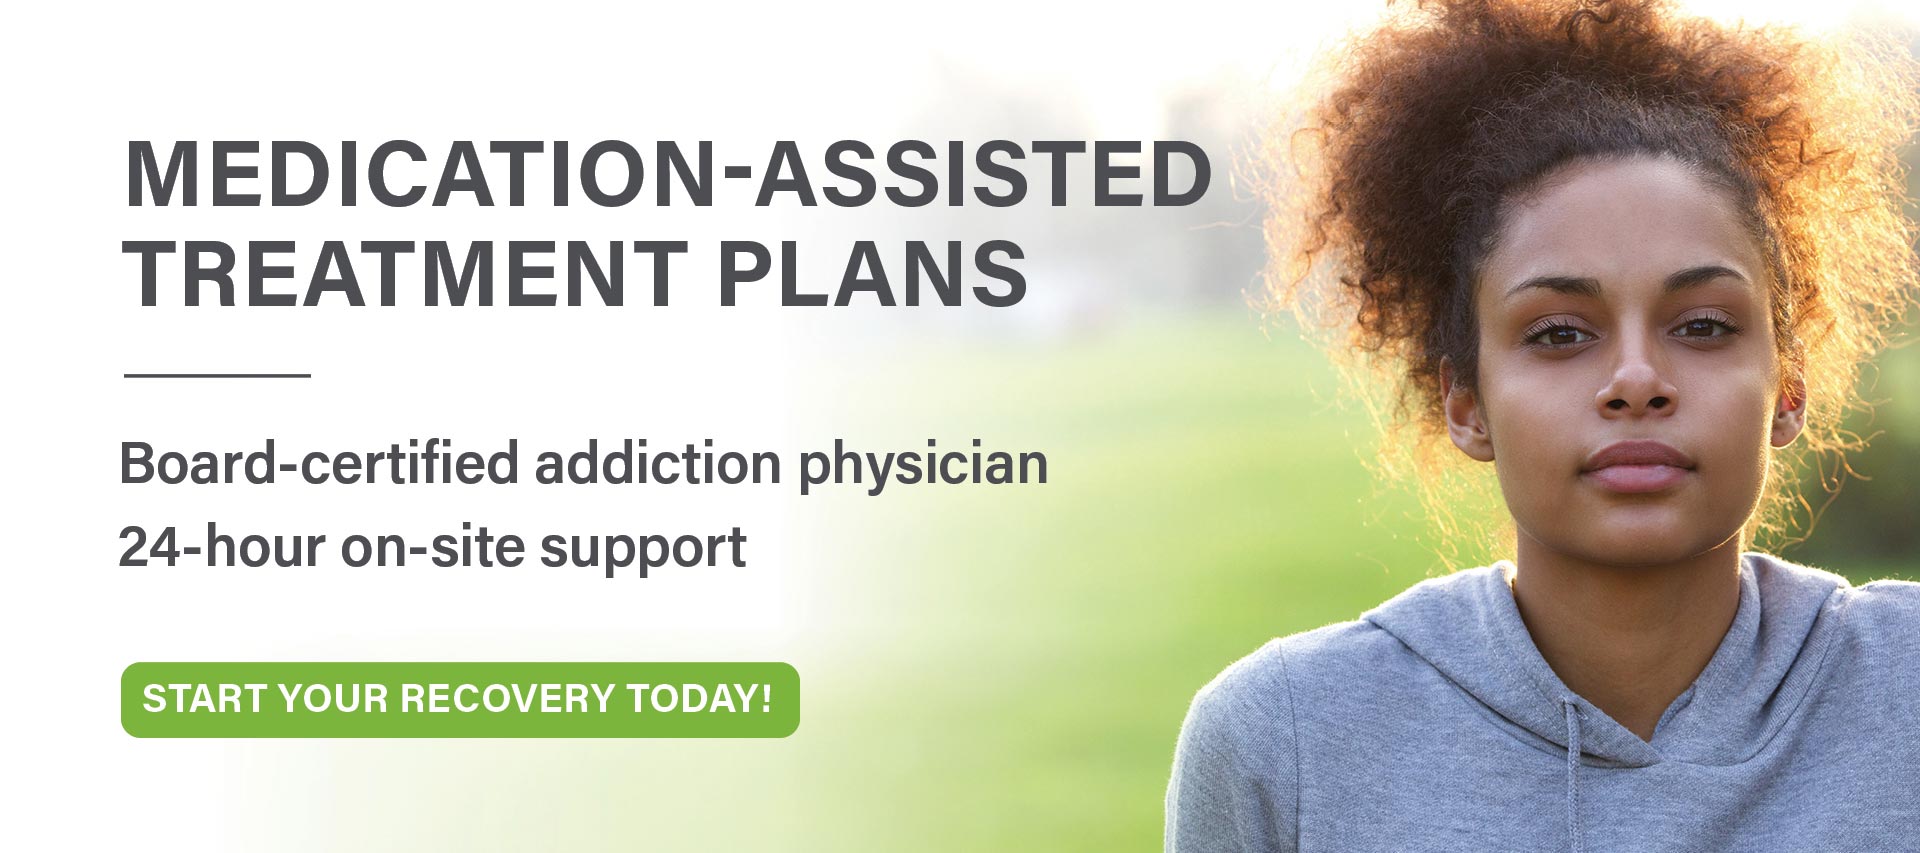 Medication-assisted treatment plans.